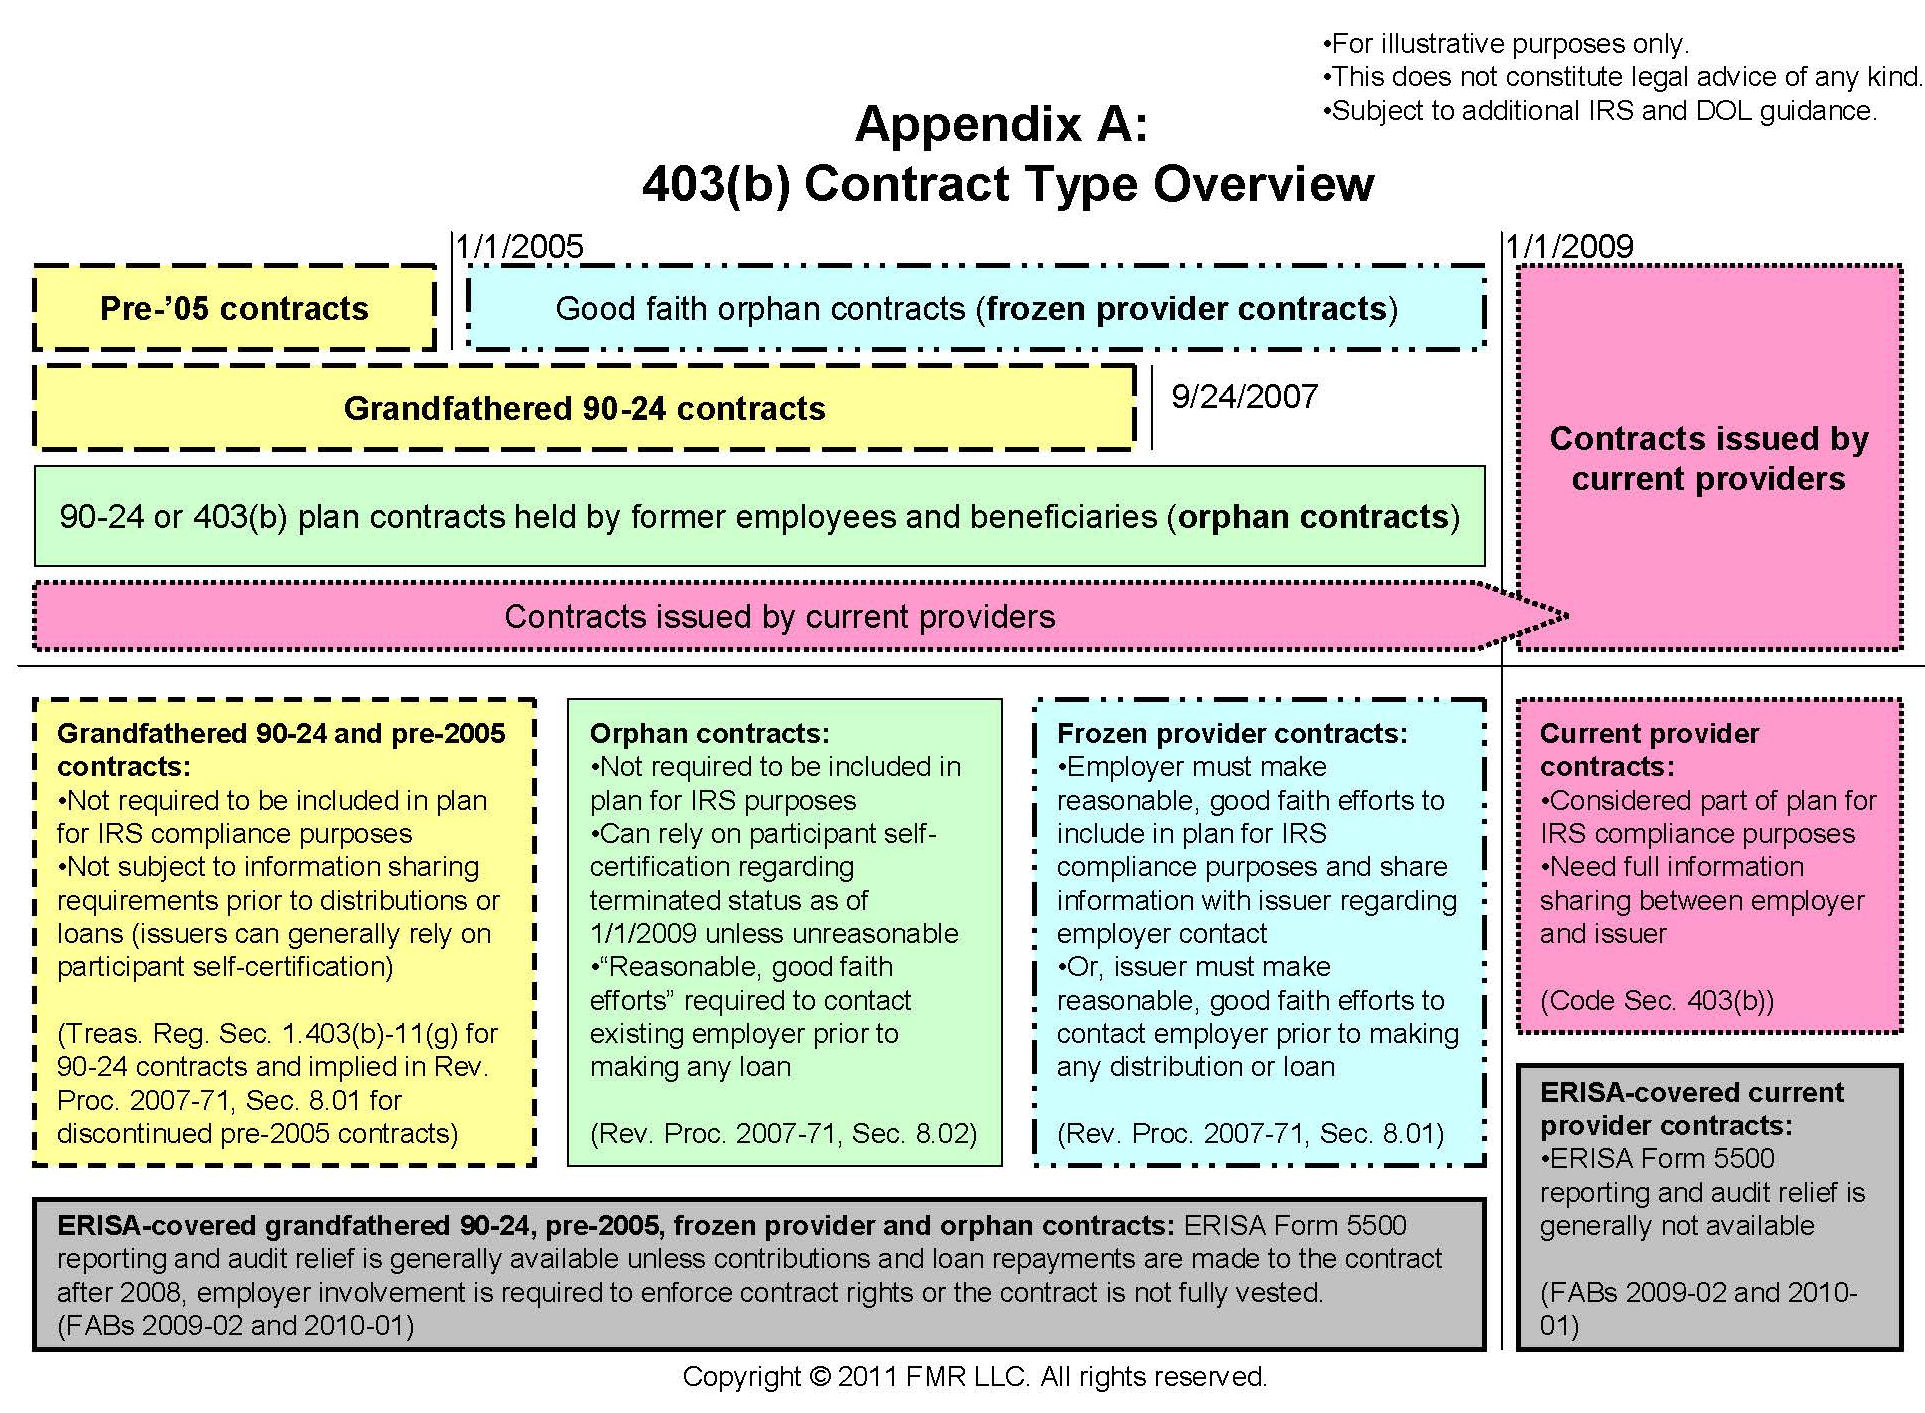 Appendix A: 403(b) Contract Type Overview